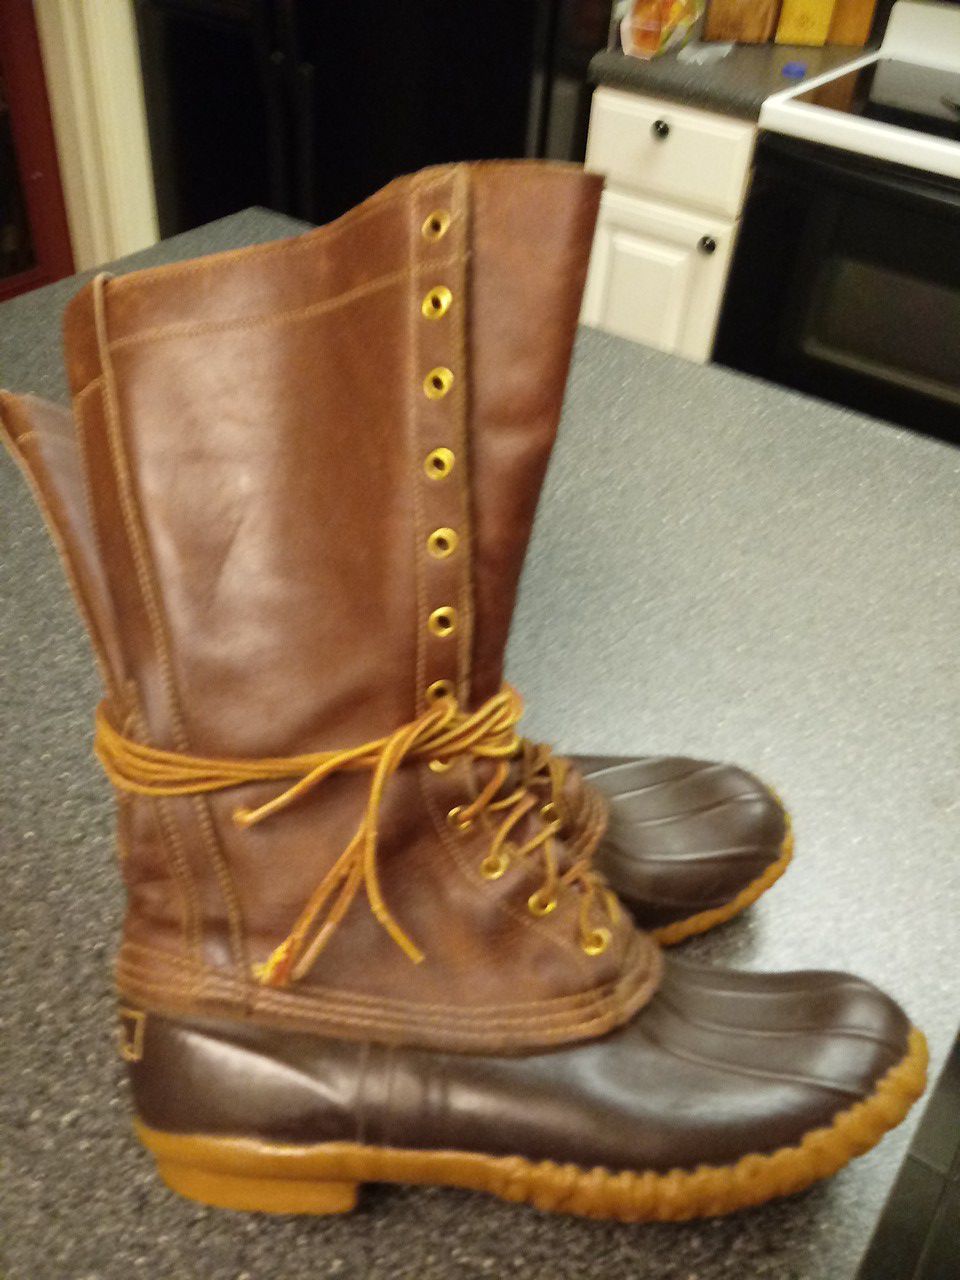 LL BEAN TALL SNAKE PROOF LEATHER HUNTING BOOTS SIZE 10 89.00